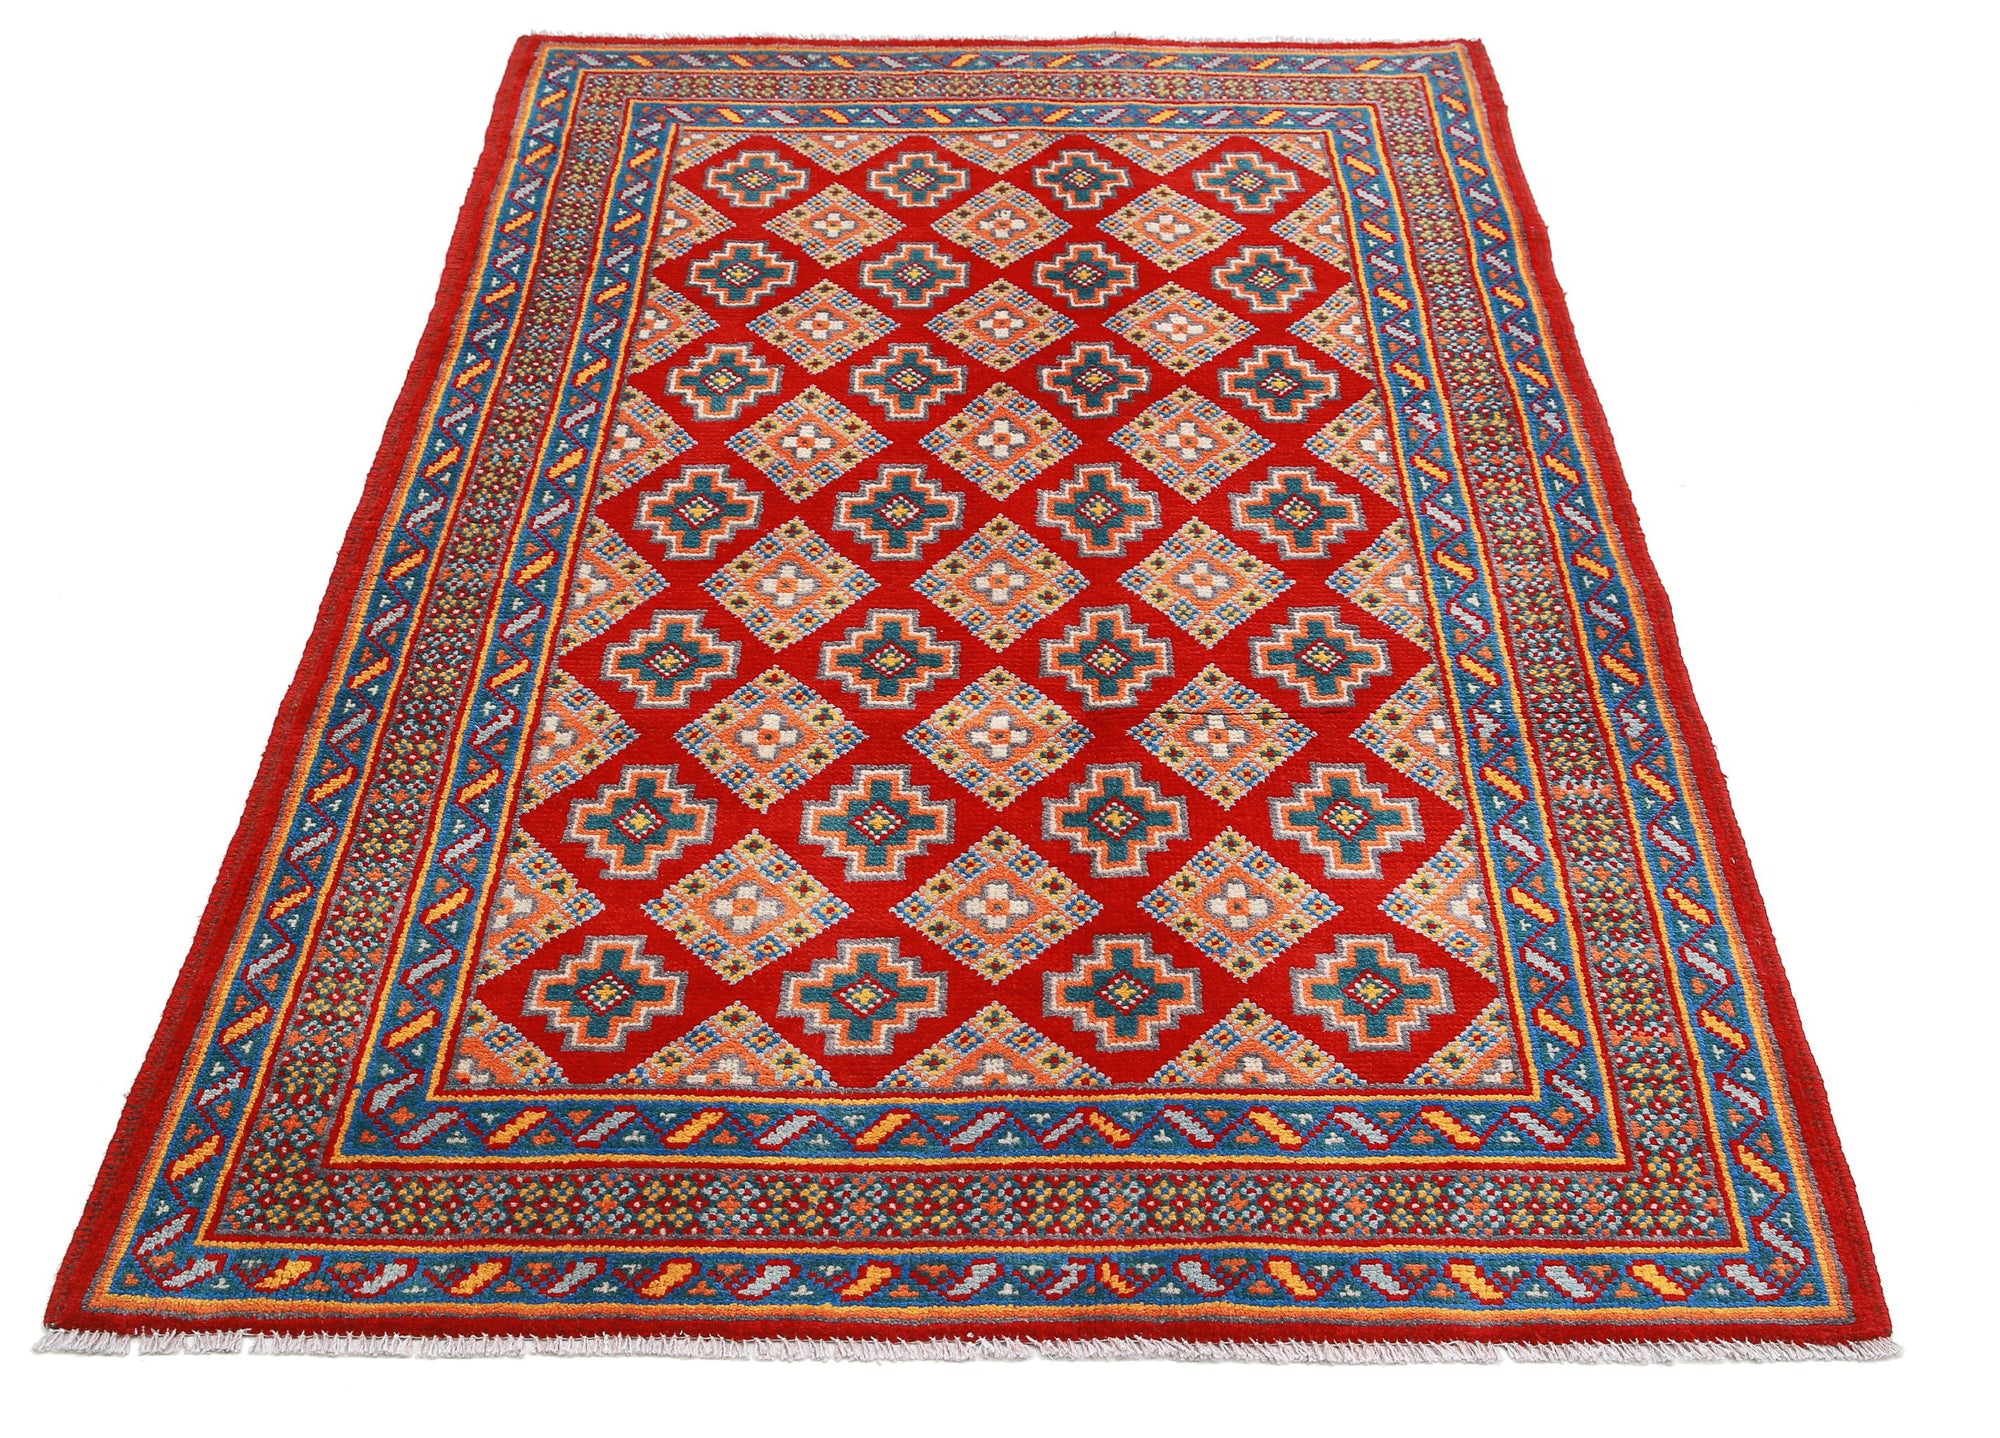 Revival-hand-knotted-qarghani-wool-rug-5014214-3.jpg